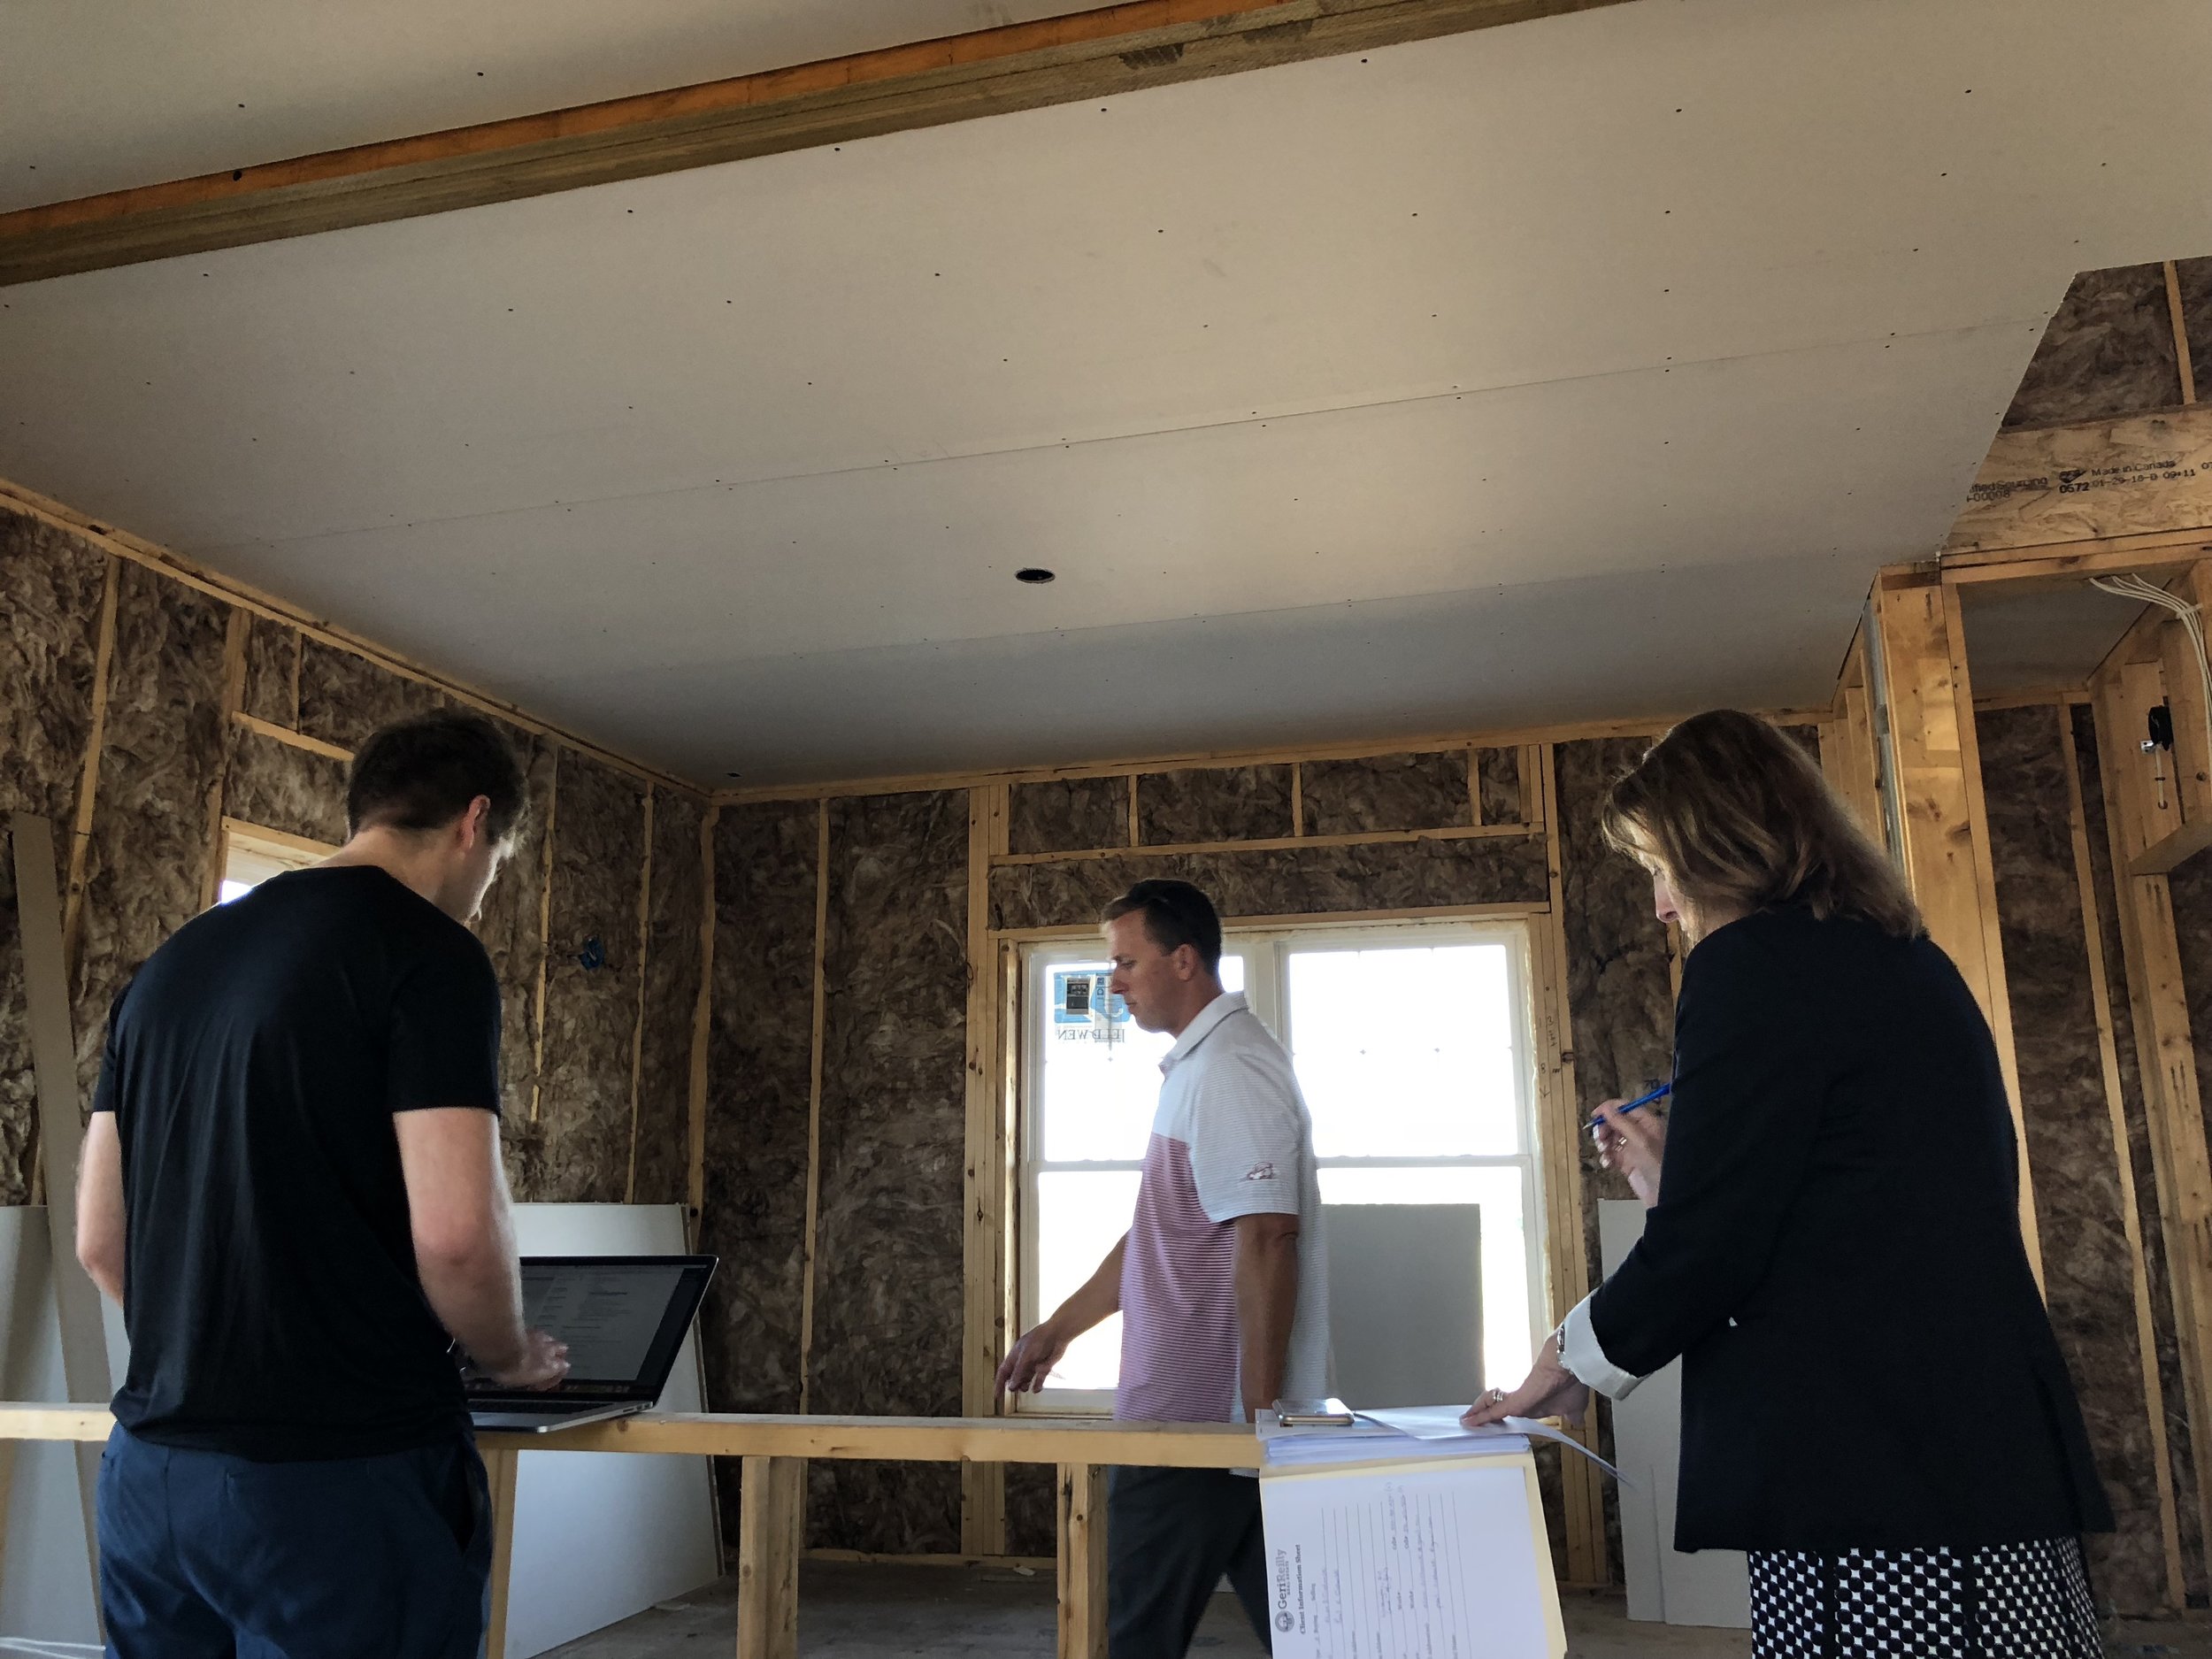  I mean, what kind of a blogger would I be if I didn’t document EVERYTHING?! Here we are in a similar home to ours that’s currently under construction. We’re walking through our list of questions with our builder and real estate agent. So. Many. Ques